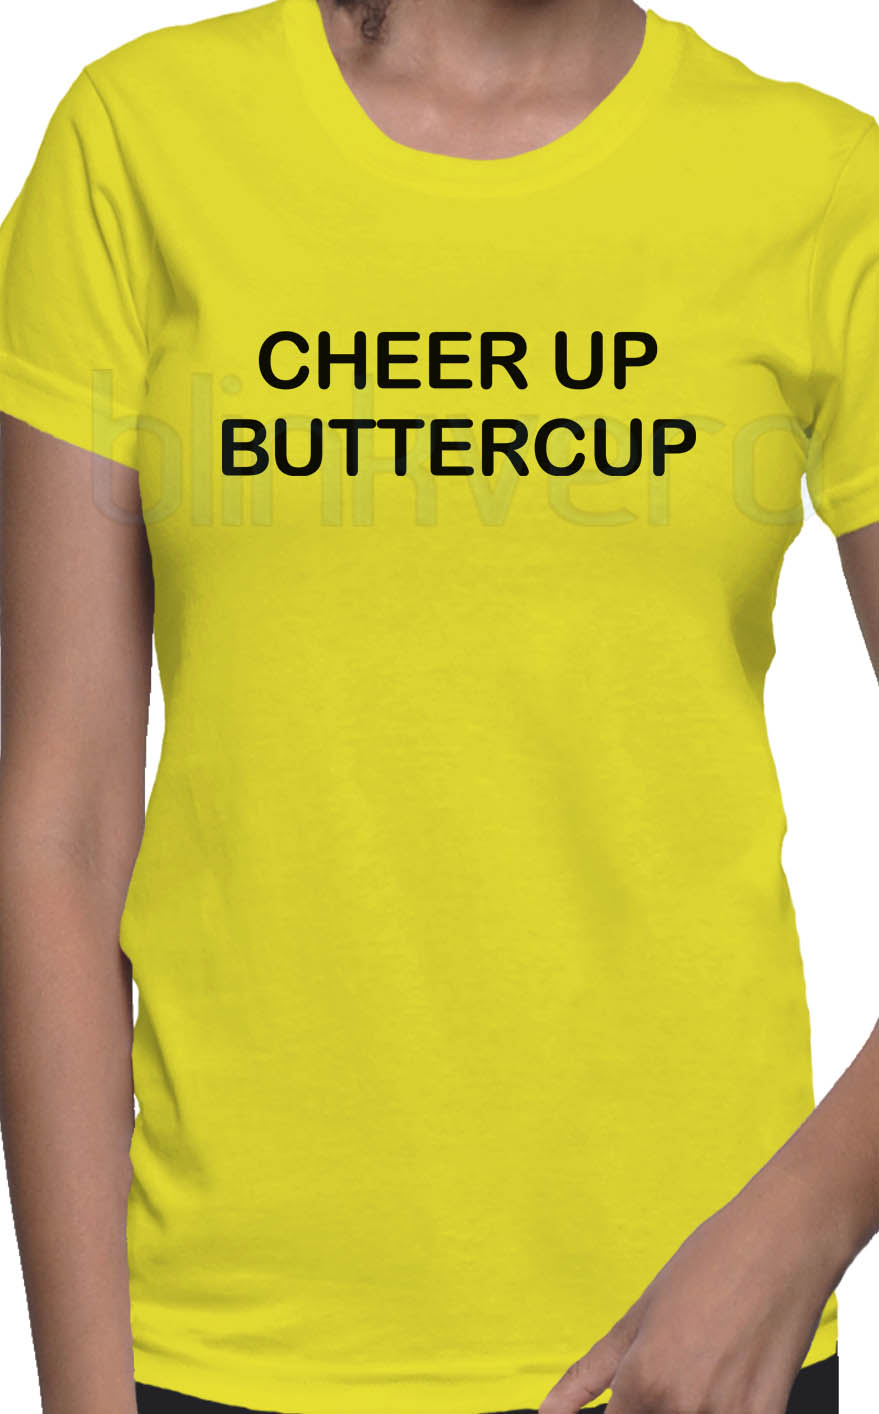 cheer up buttercup poem